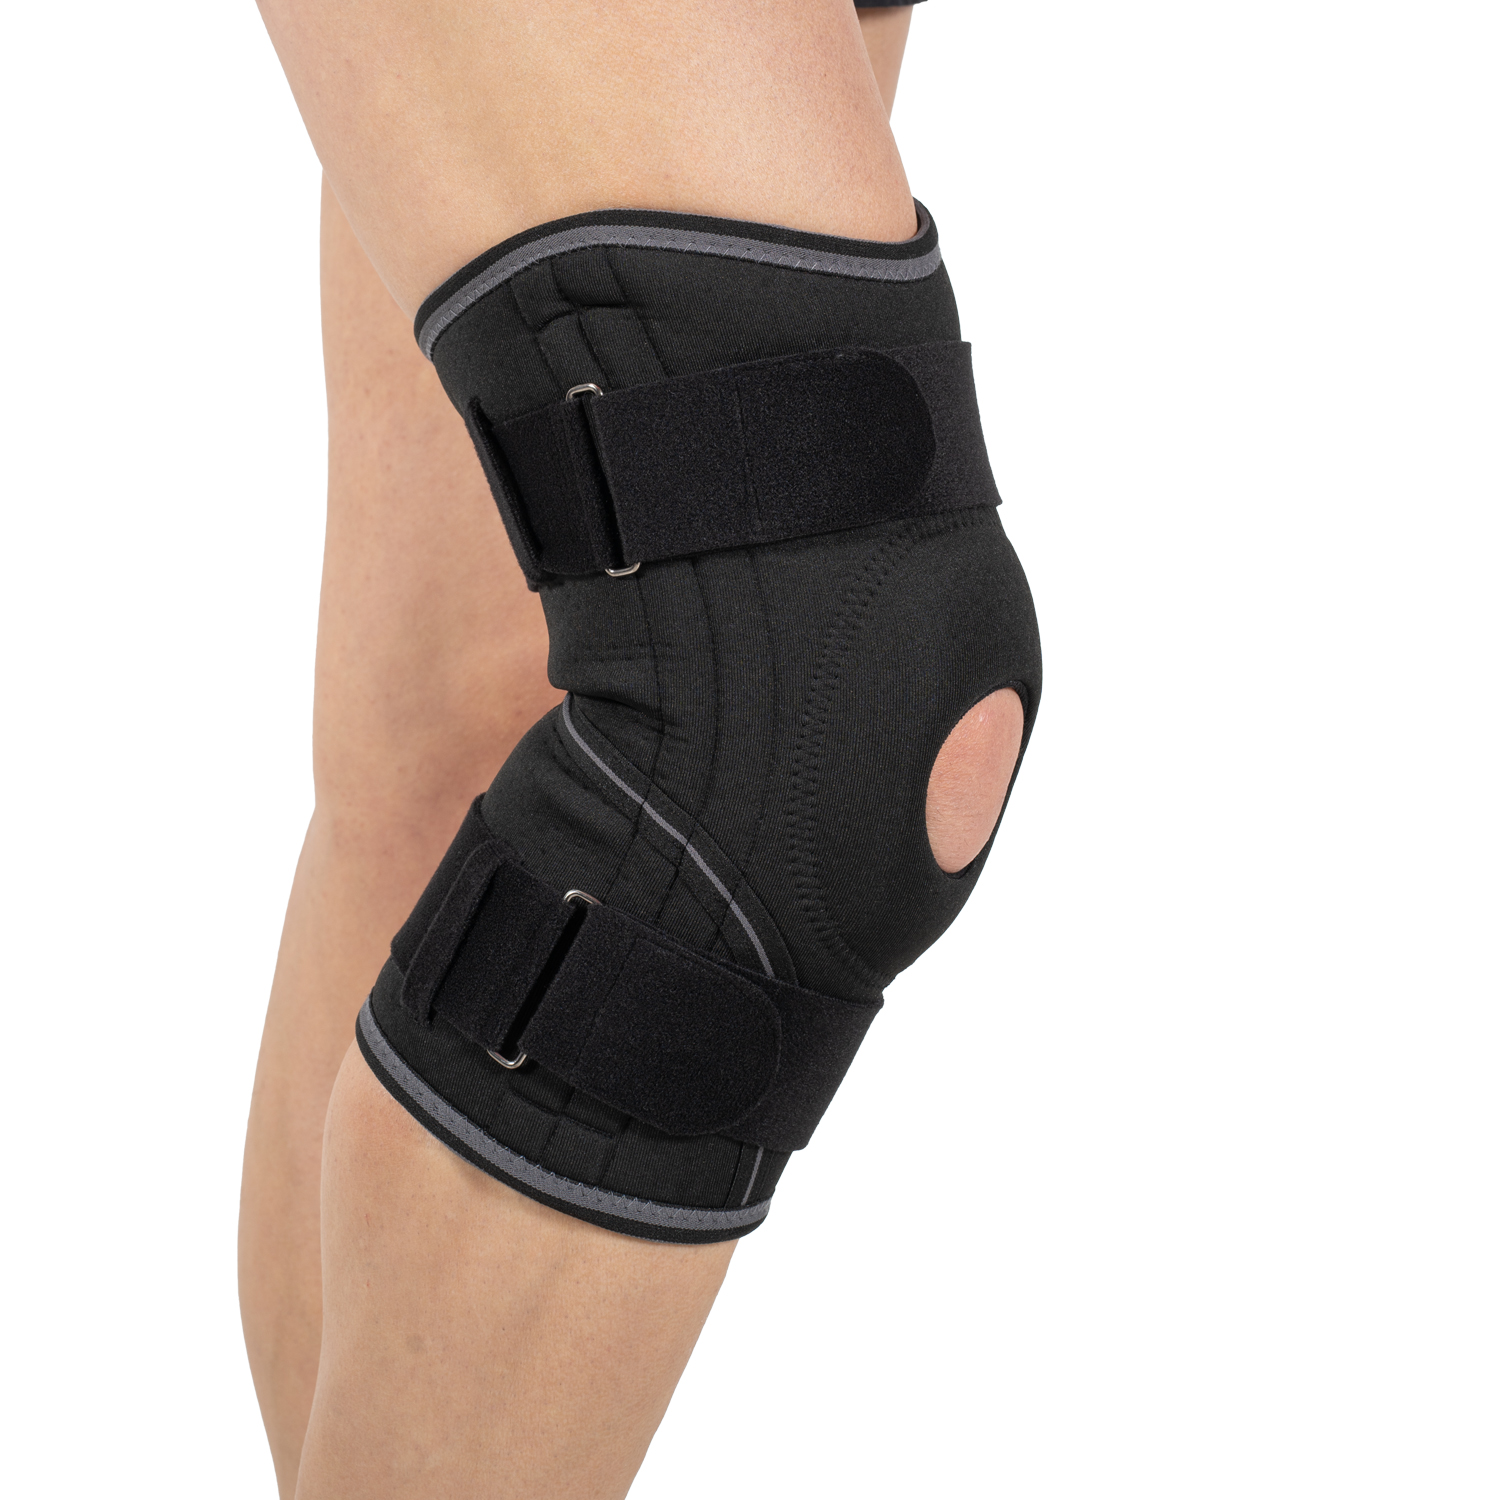 Patella And Ligament Knee Support With Velcro Reinforcement